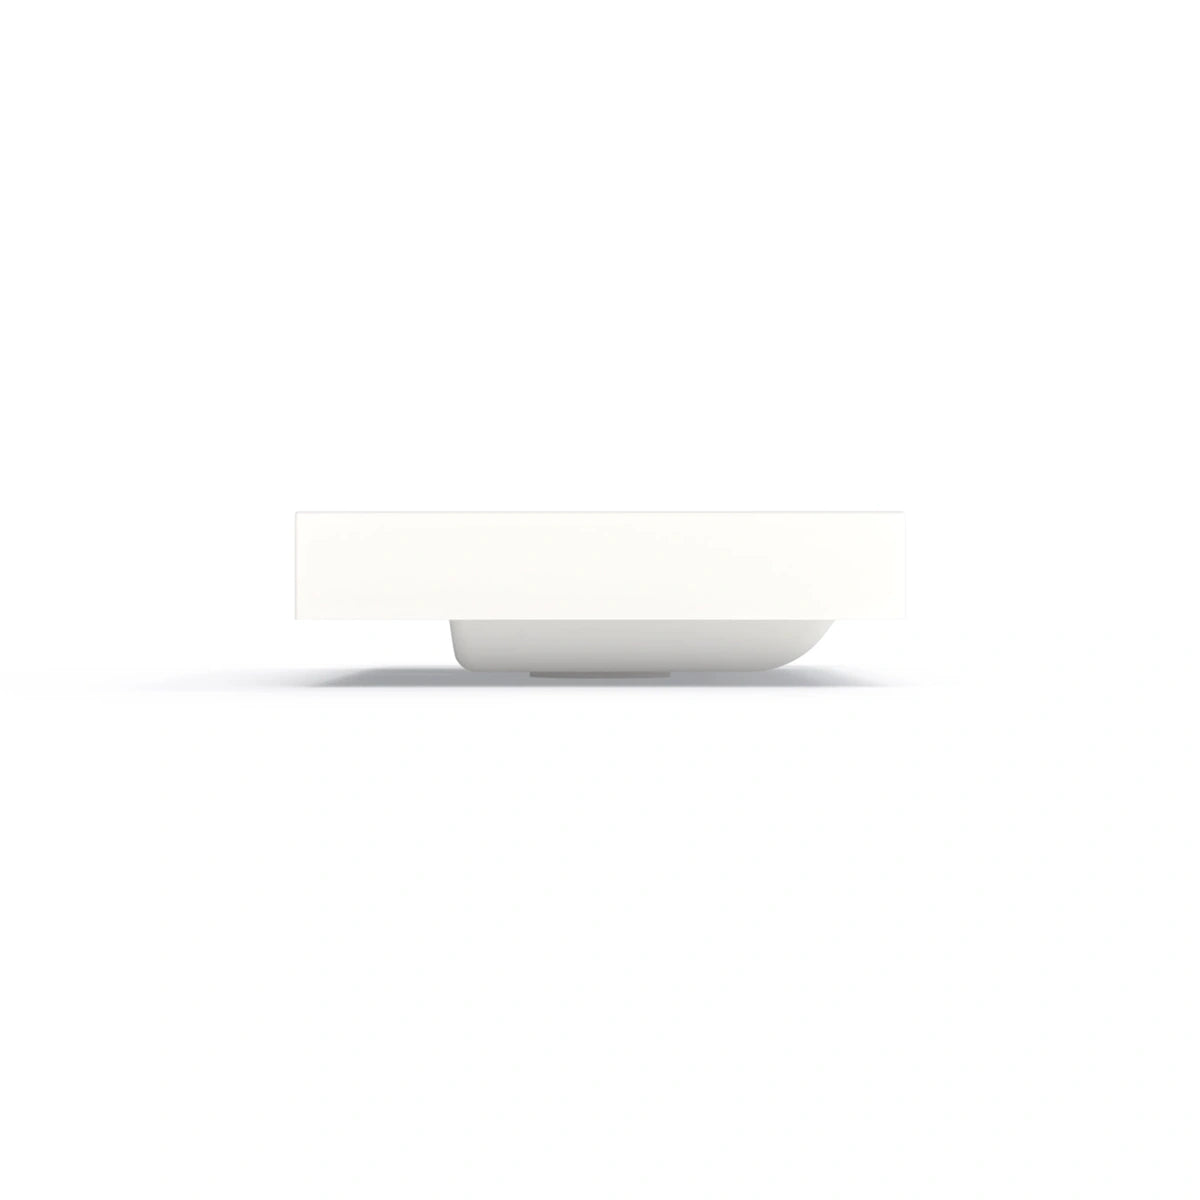 Bathroom sink M-70 - 27.56 in. x 17.72 in. - glossy white